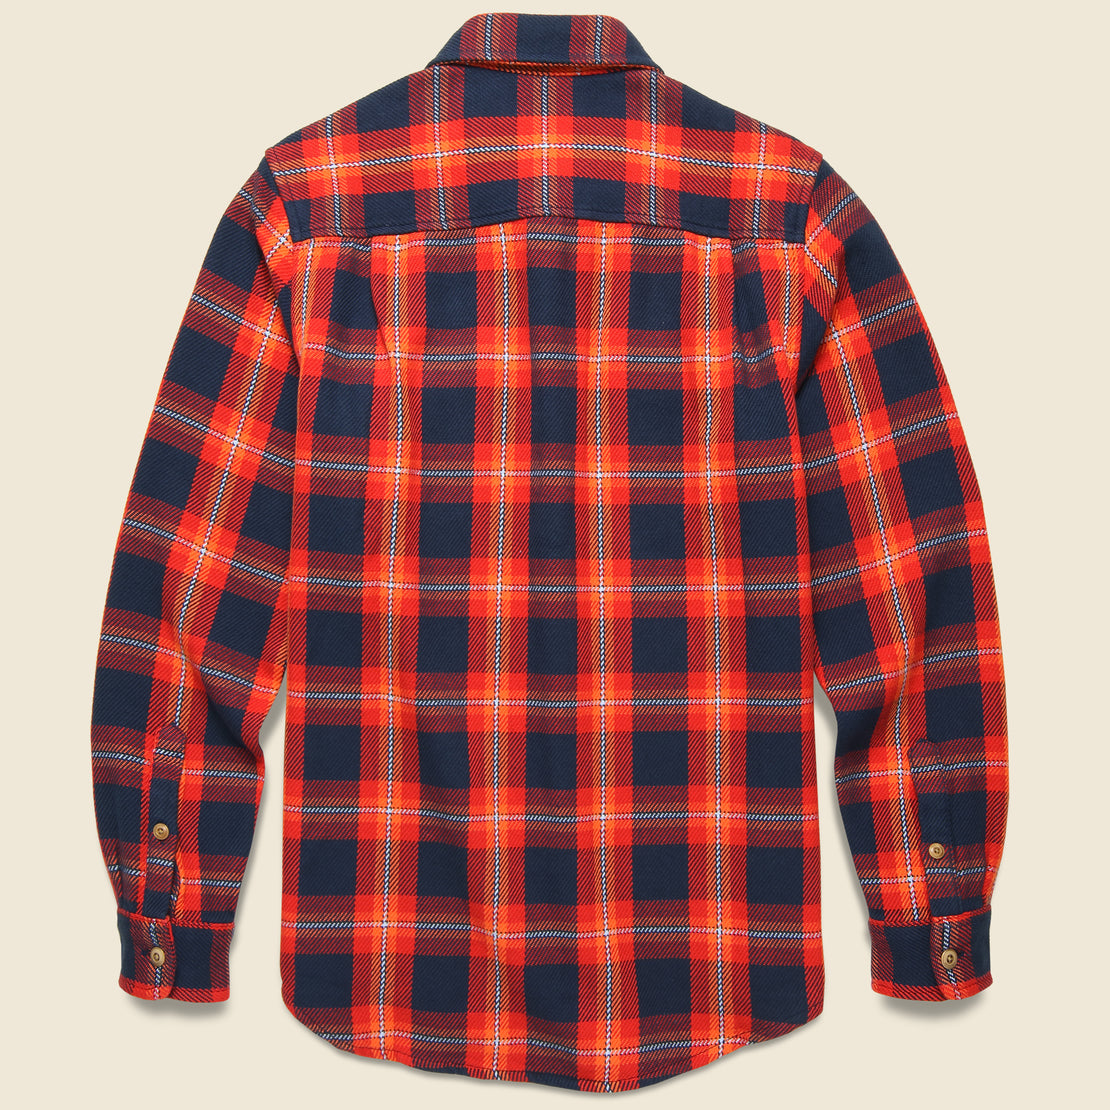 Blanket Shirt - Marine Princeton Plaid - Outerknown - STAG Provisions - Tops - L/S Woven - Plaid